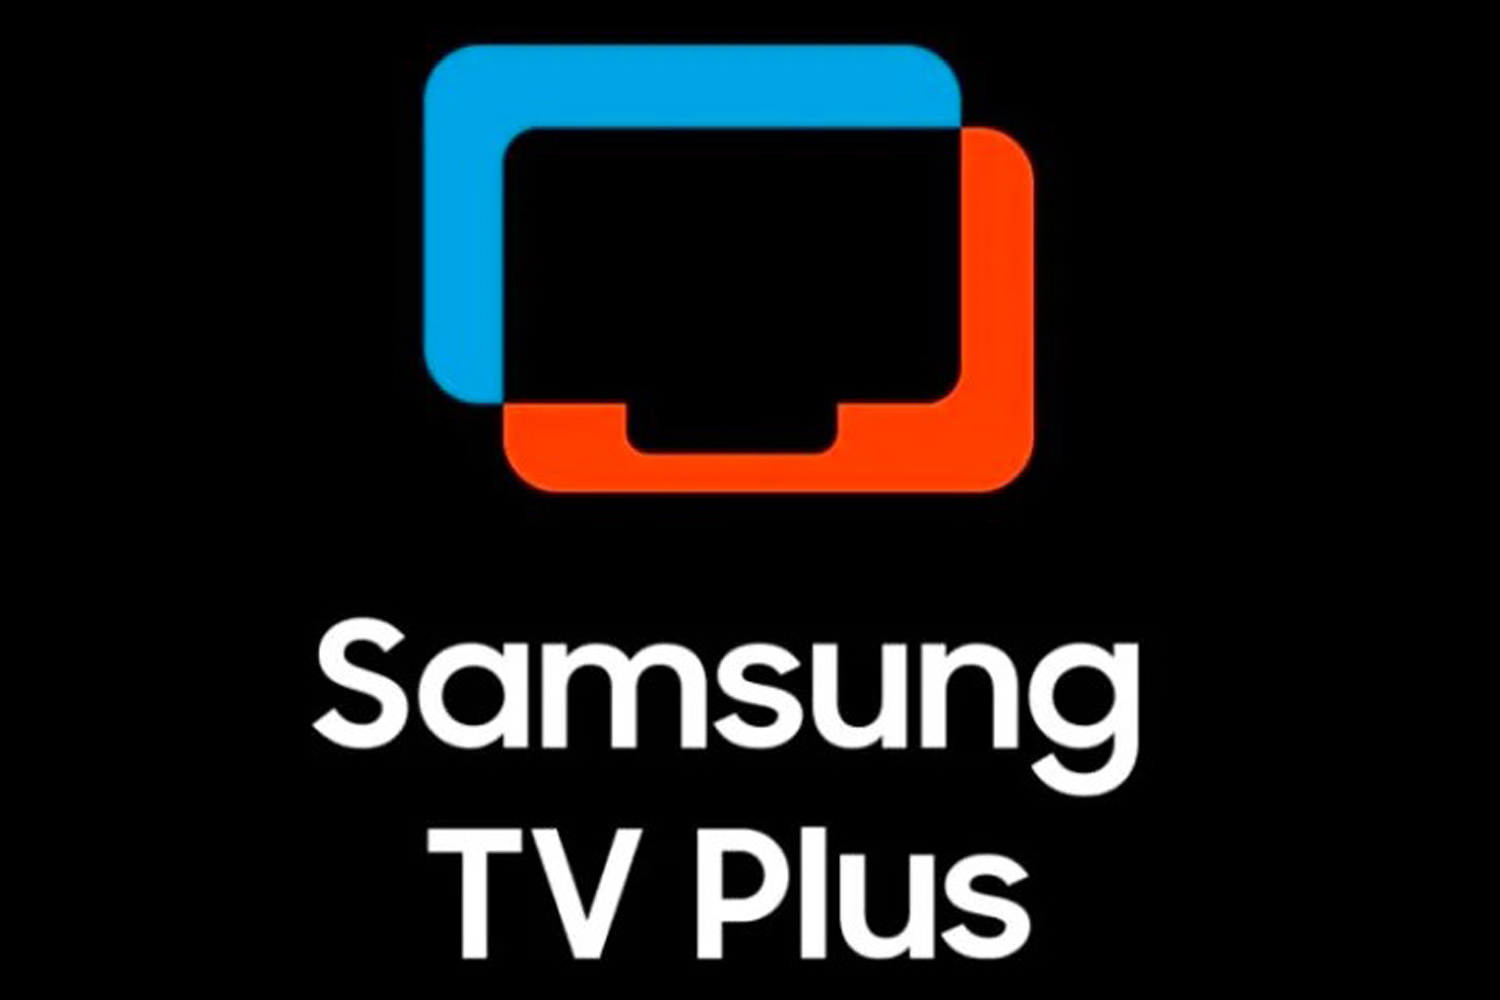 Samsung TV fans receive free upgrade with three no-cost channels from top brand